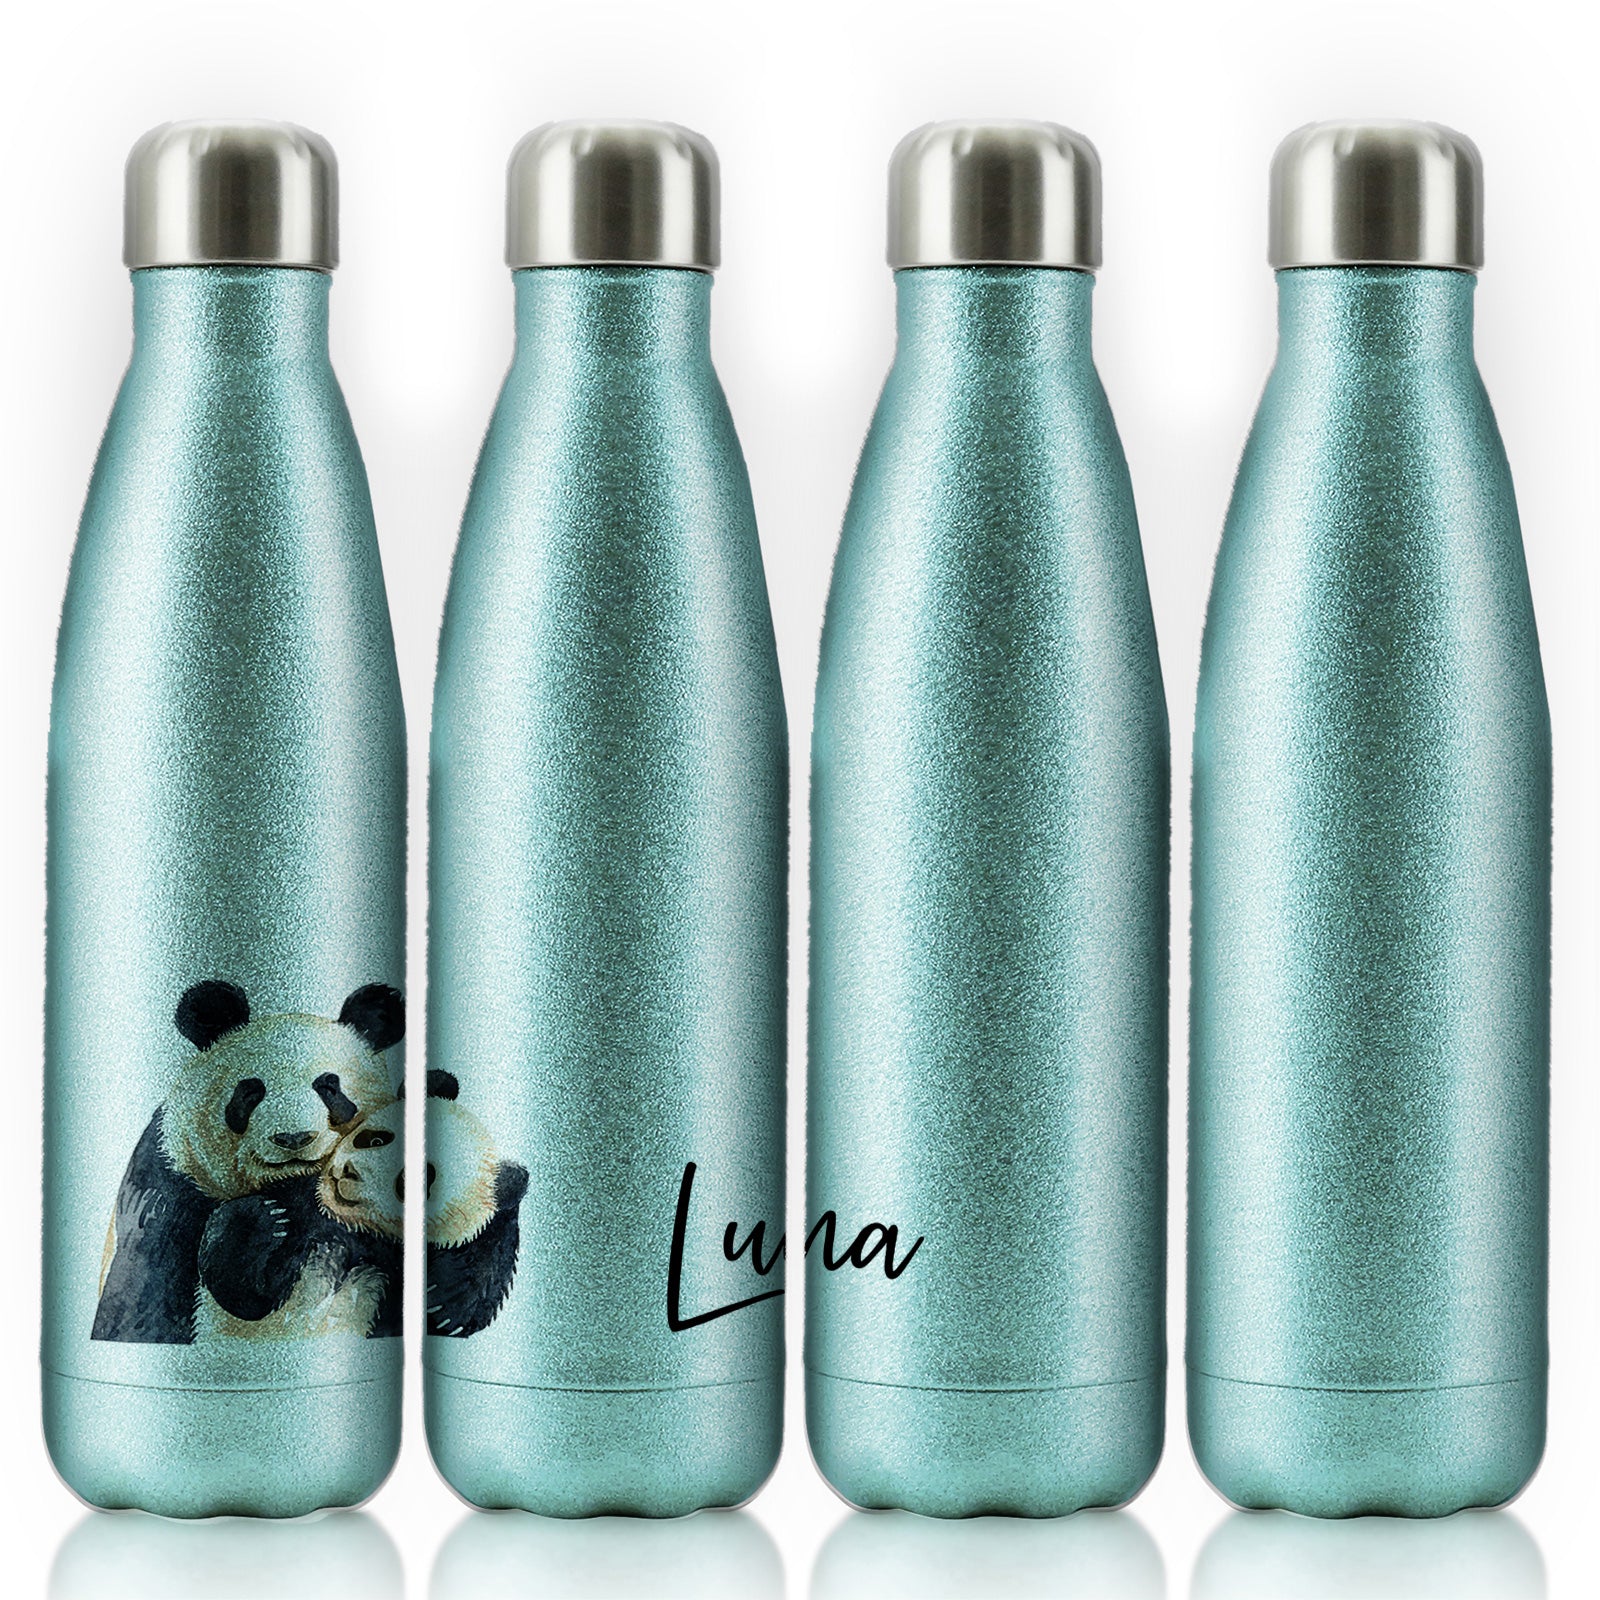 Personalised Cola Bottle with Welcoming Text and Embracing Mum and Baby Pandas